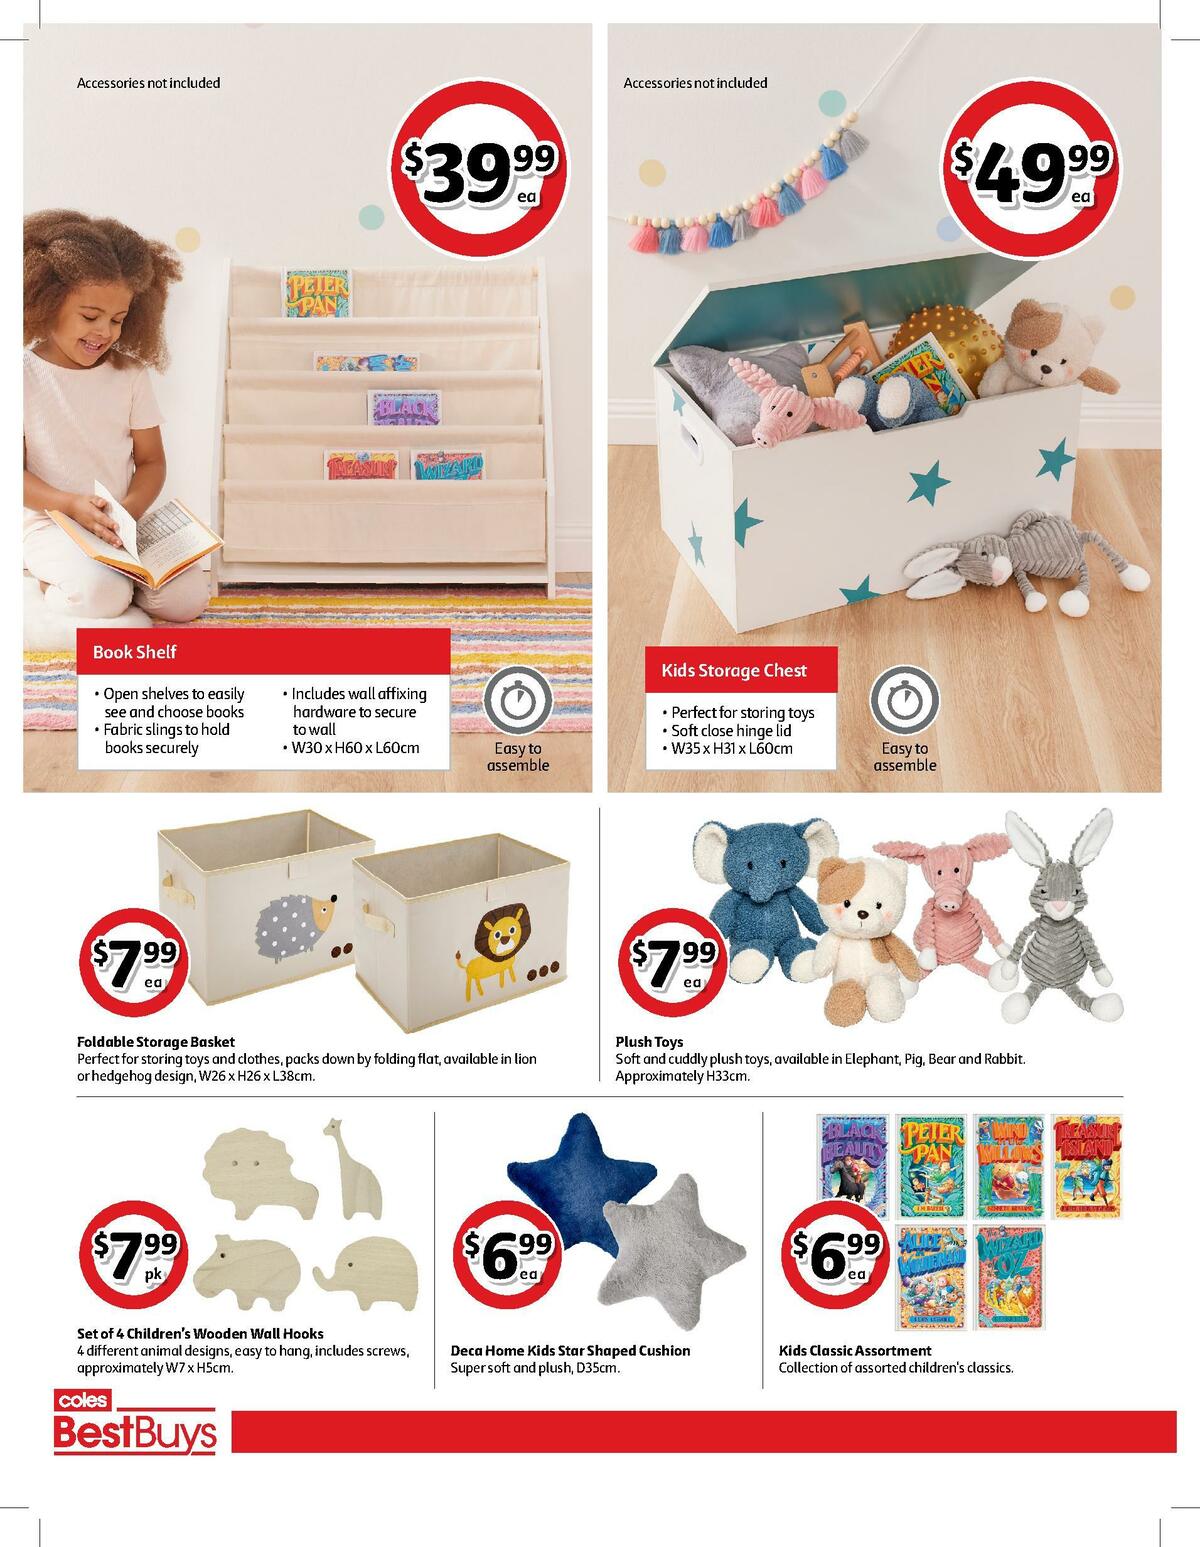 Coles Best Buys - Little Ones Catalogues from 11 February